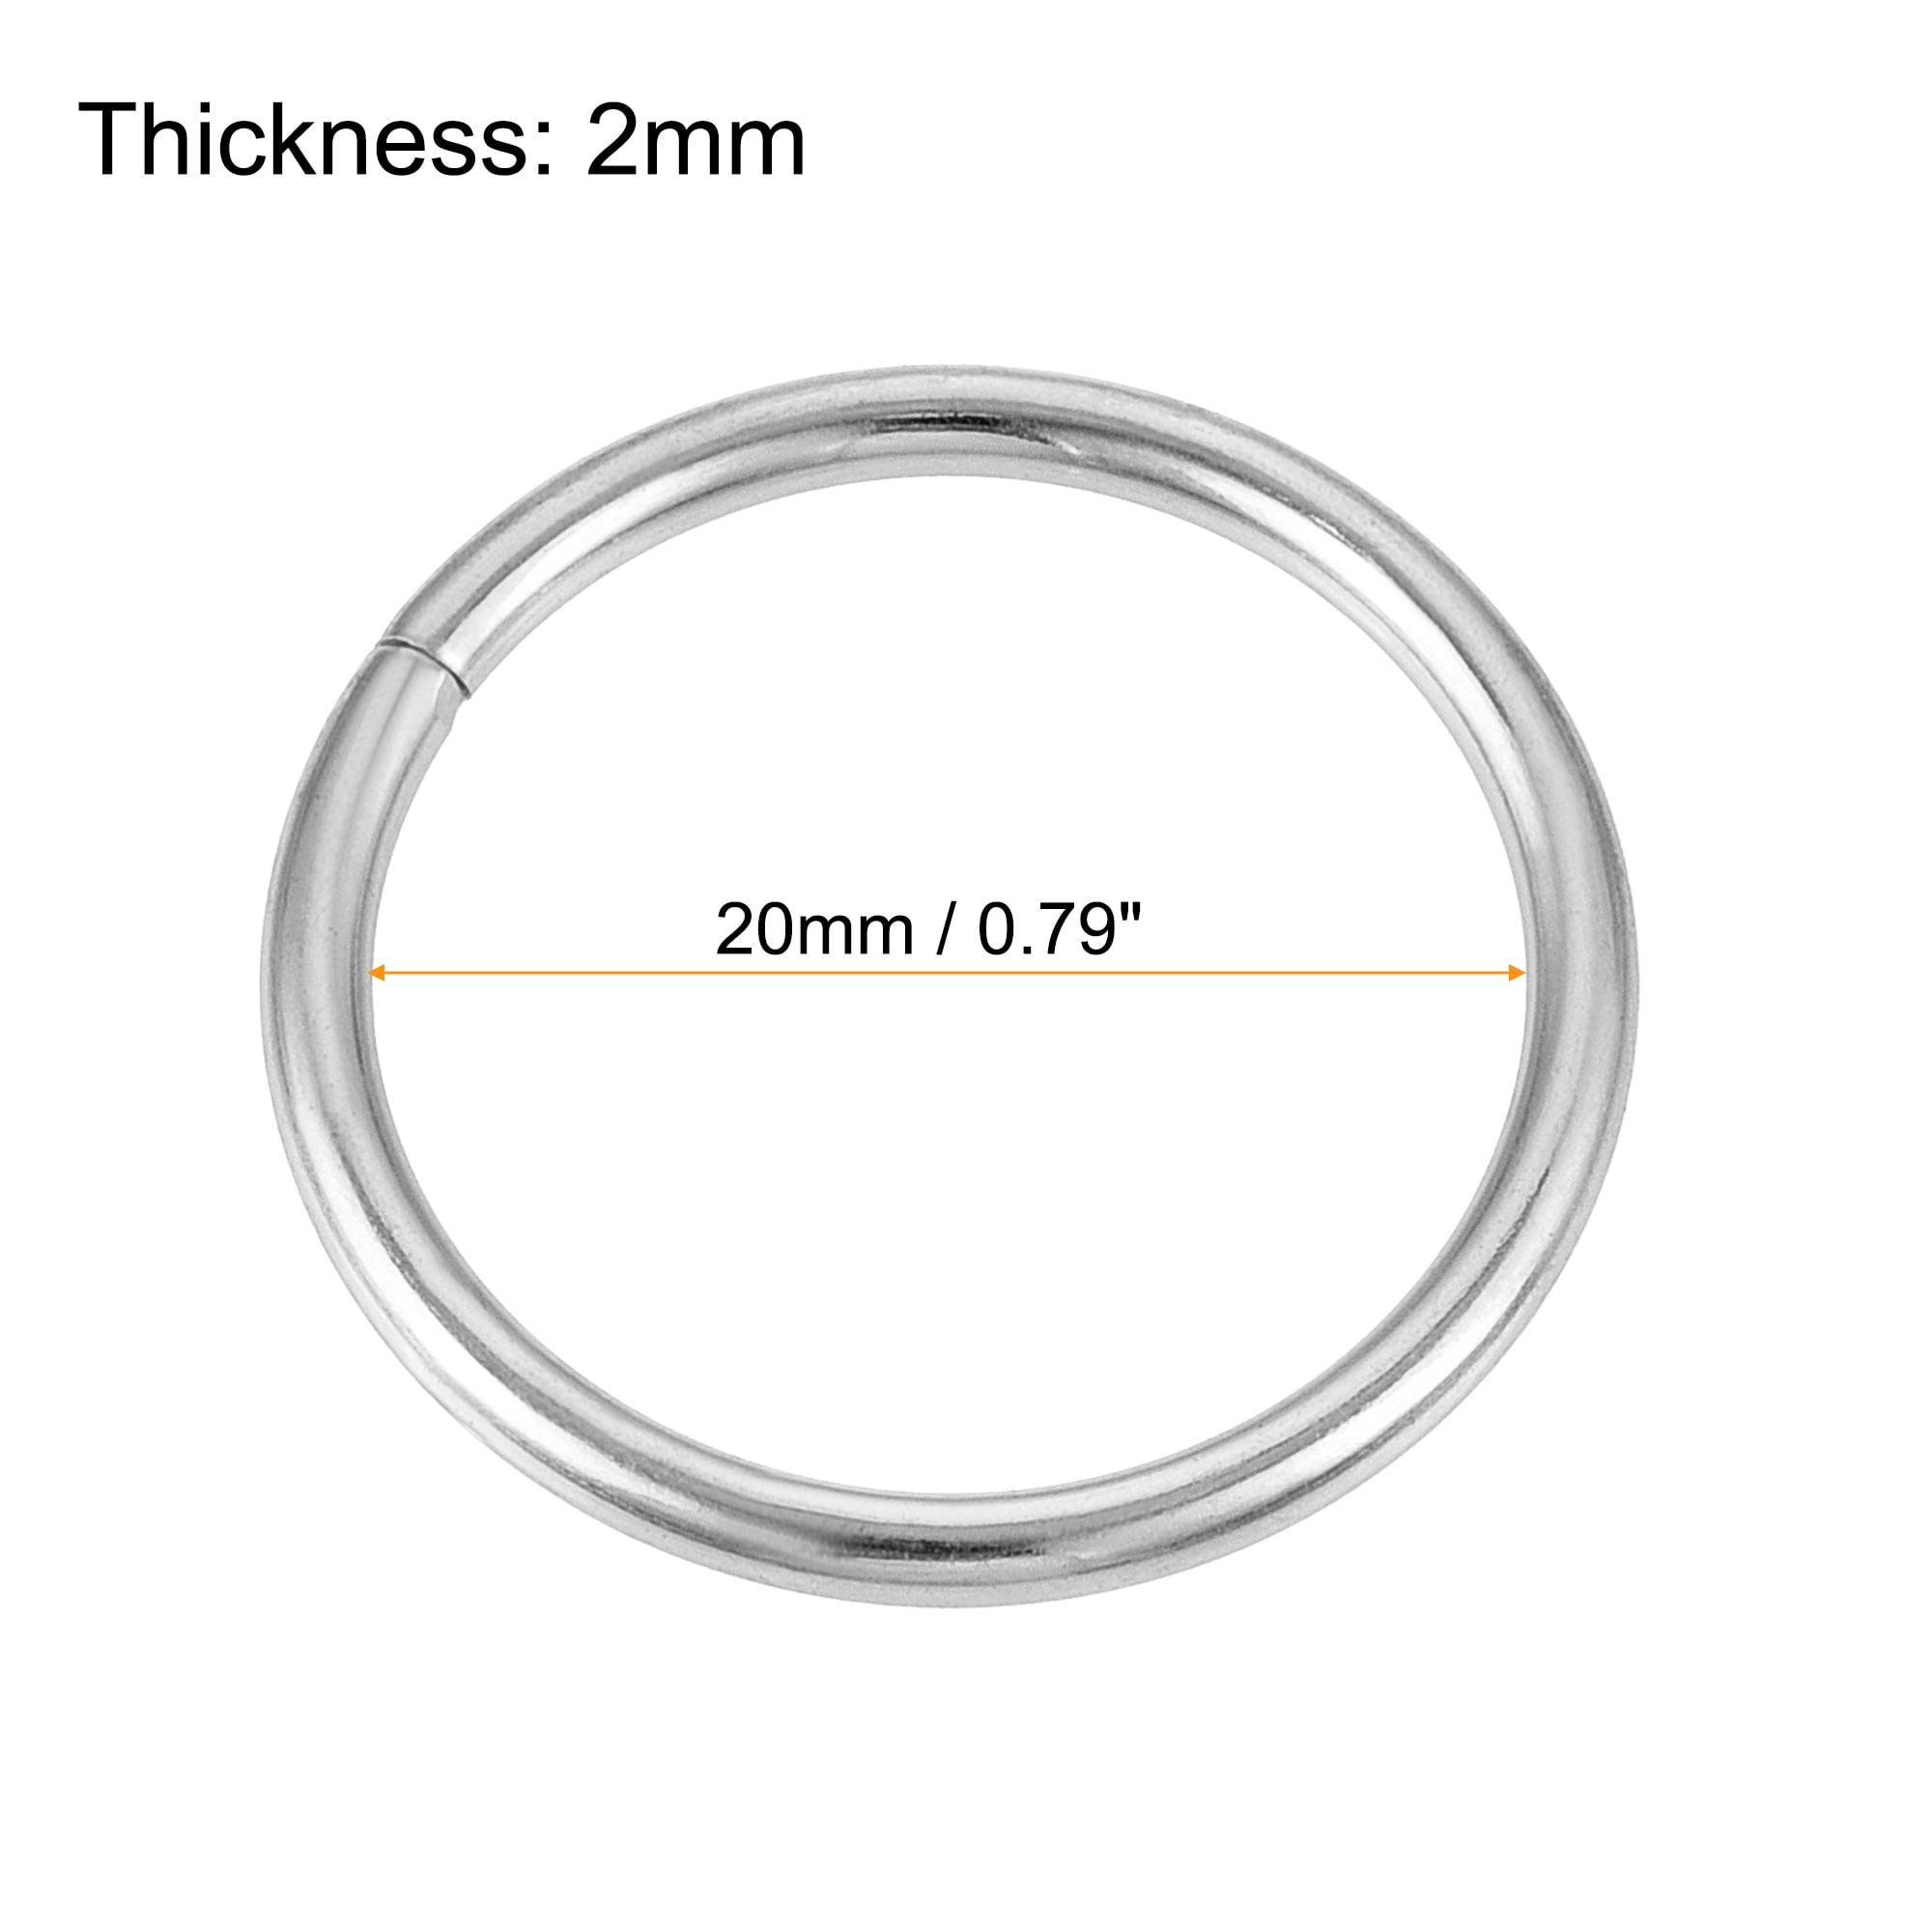 1 1/2 O Rings Metal for Straps Bags Belts Crafts Silver Tone 4 pcs